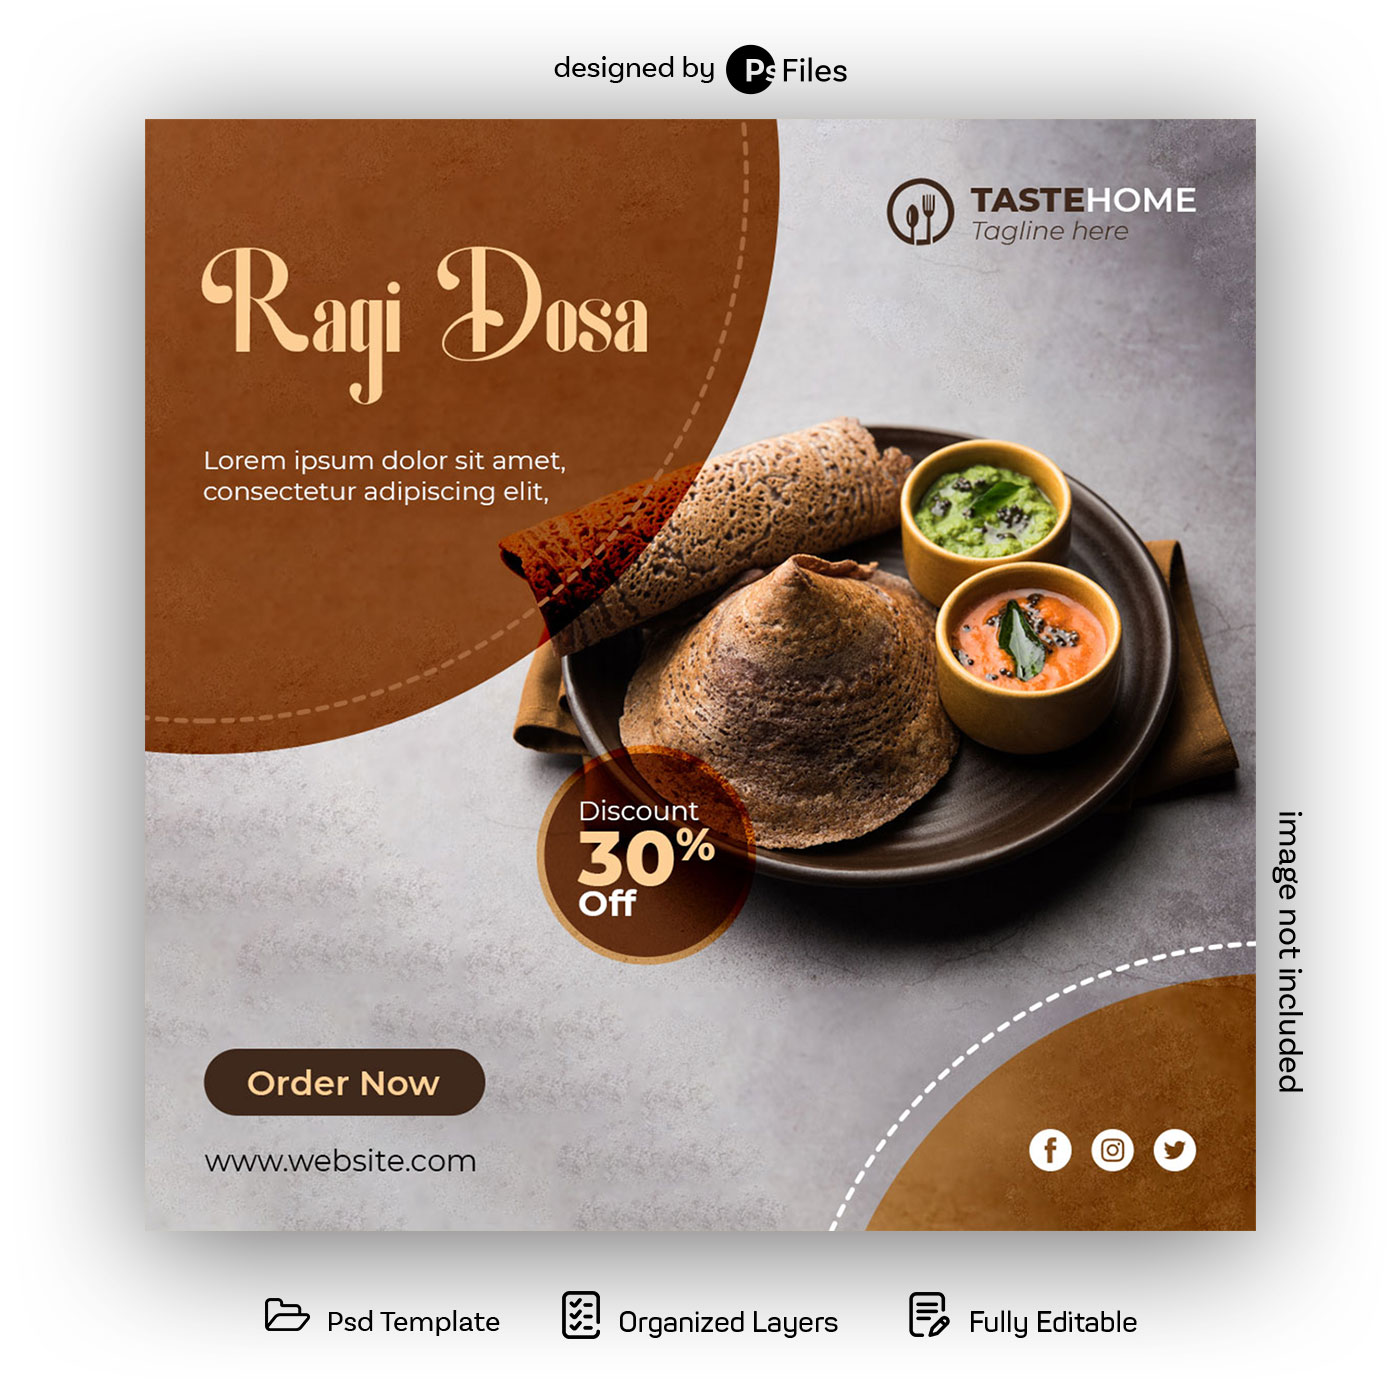 PsFiles South Indian Food Social Media Post Design Template Free Psd